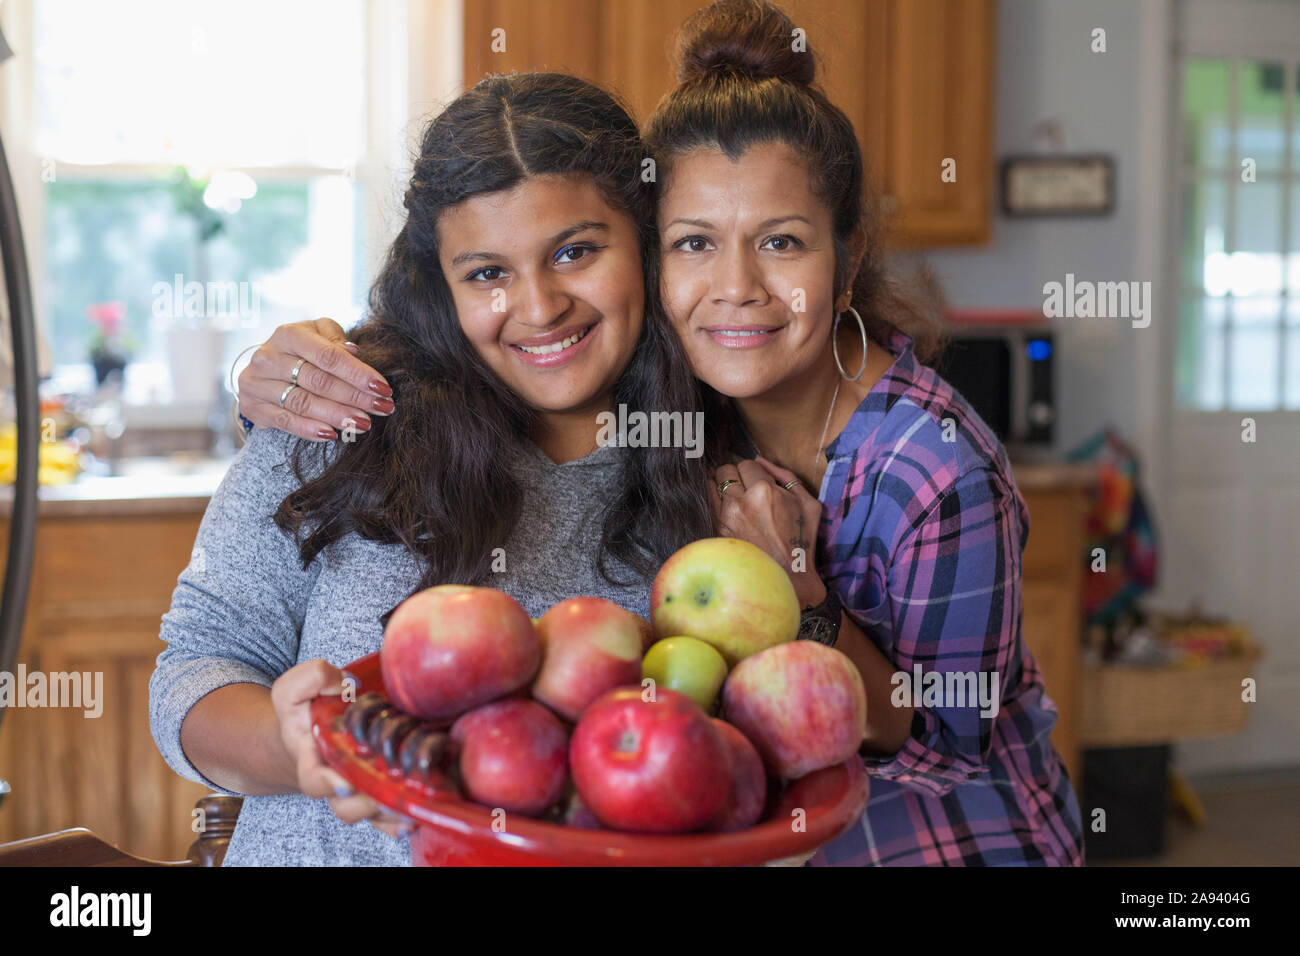 Teenage girl who has intellectual disability holding apples with her mother Stock Photo